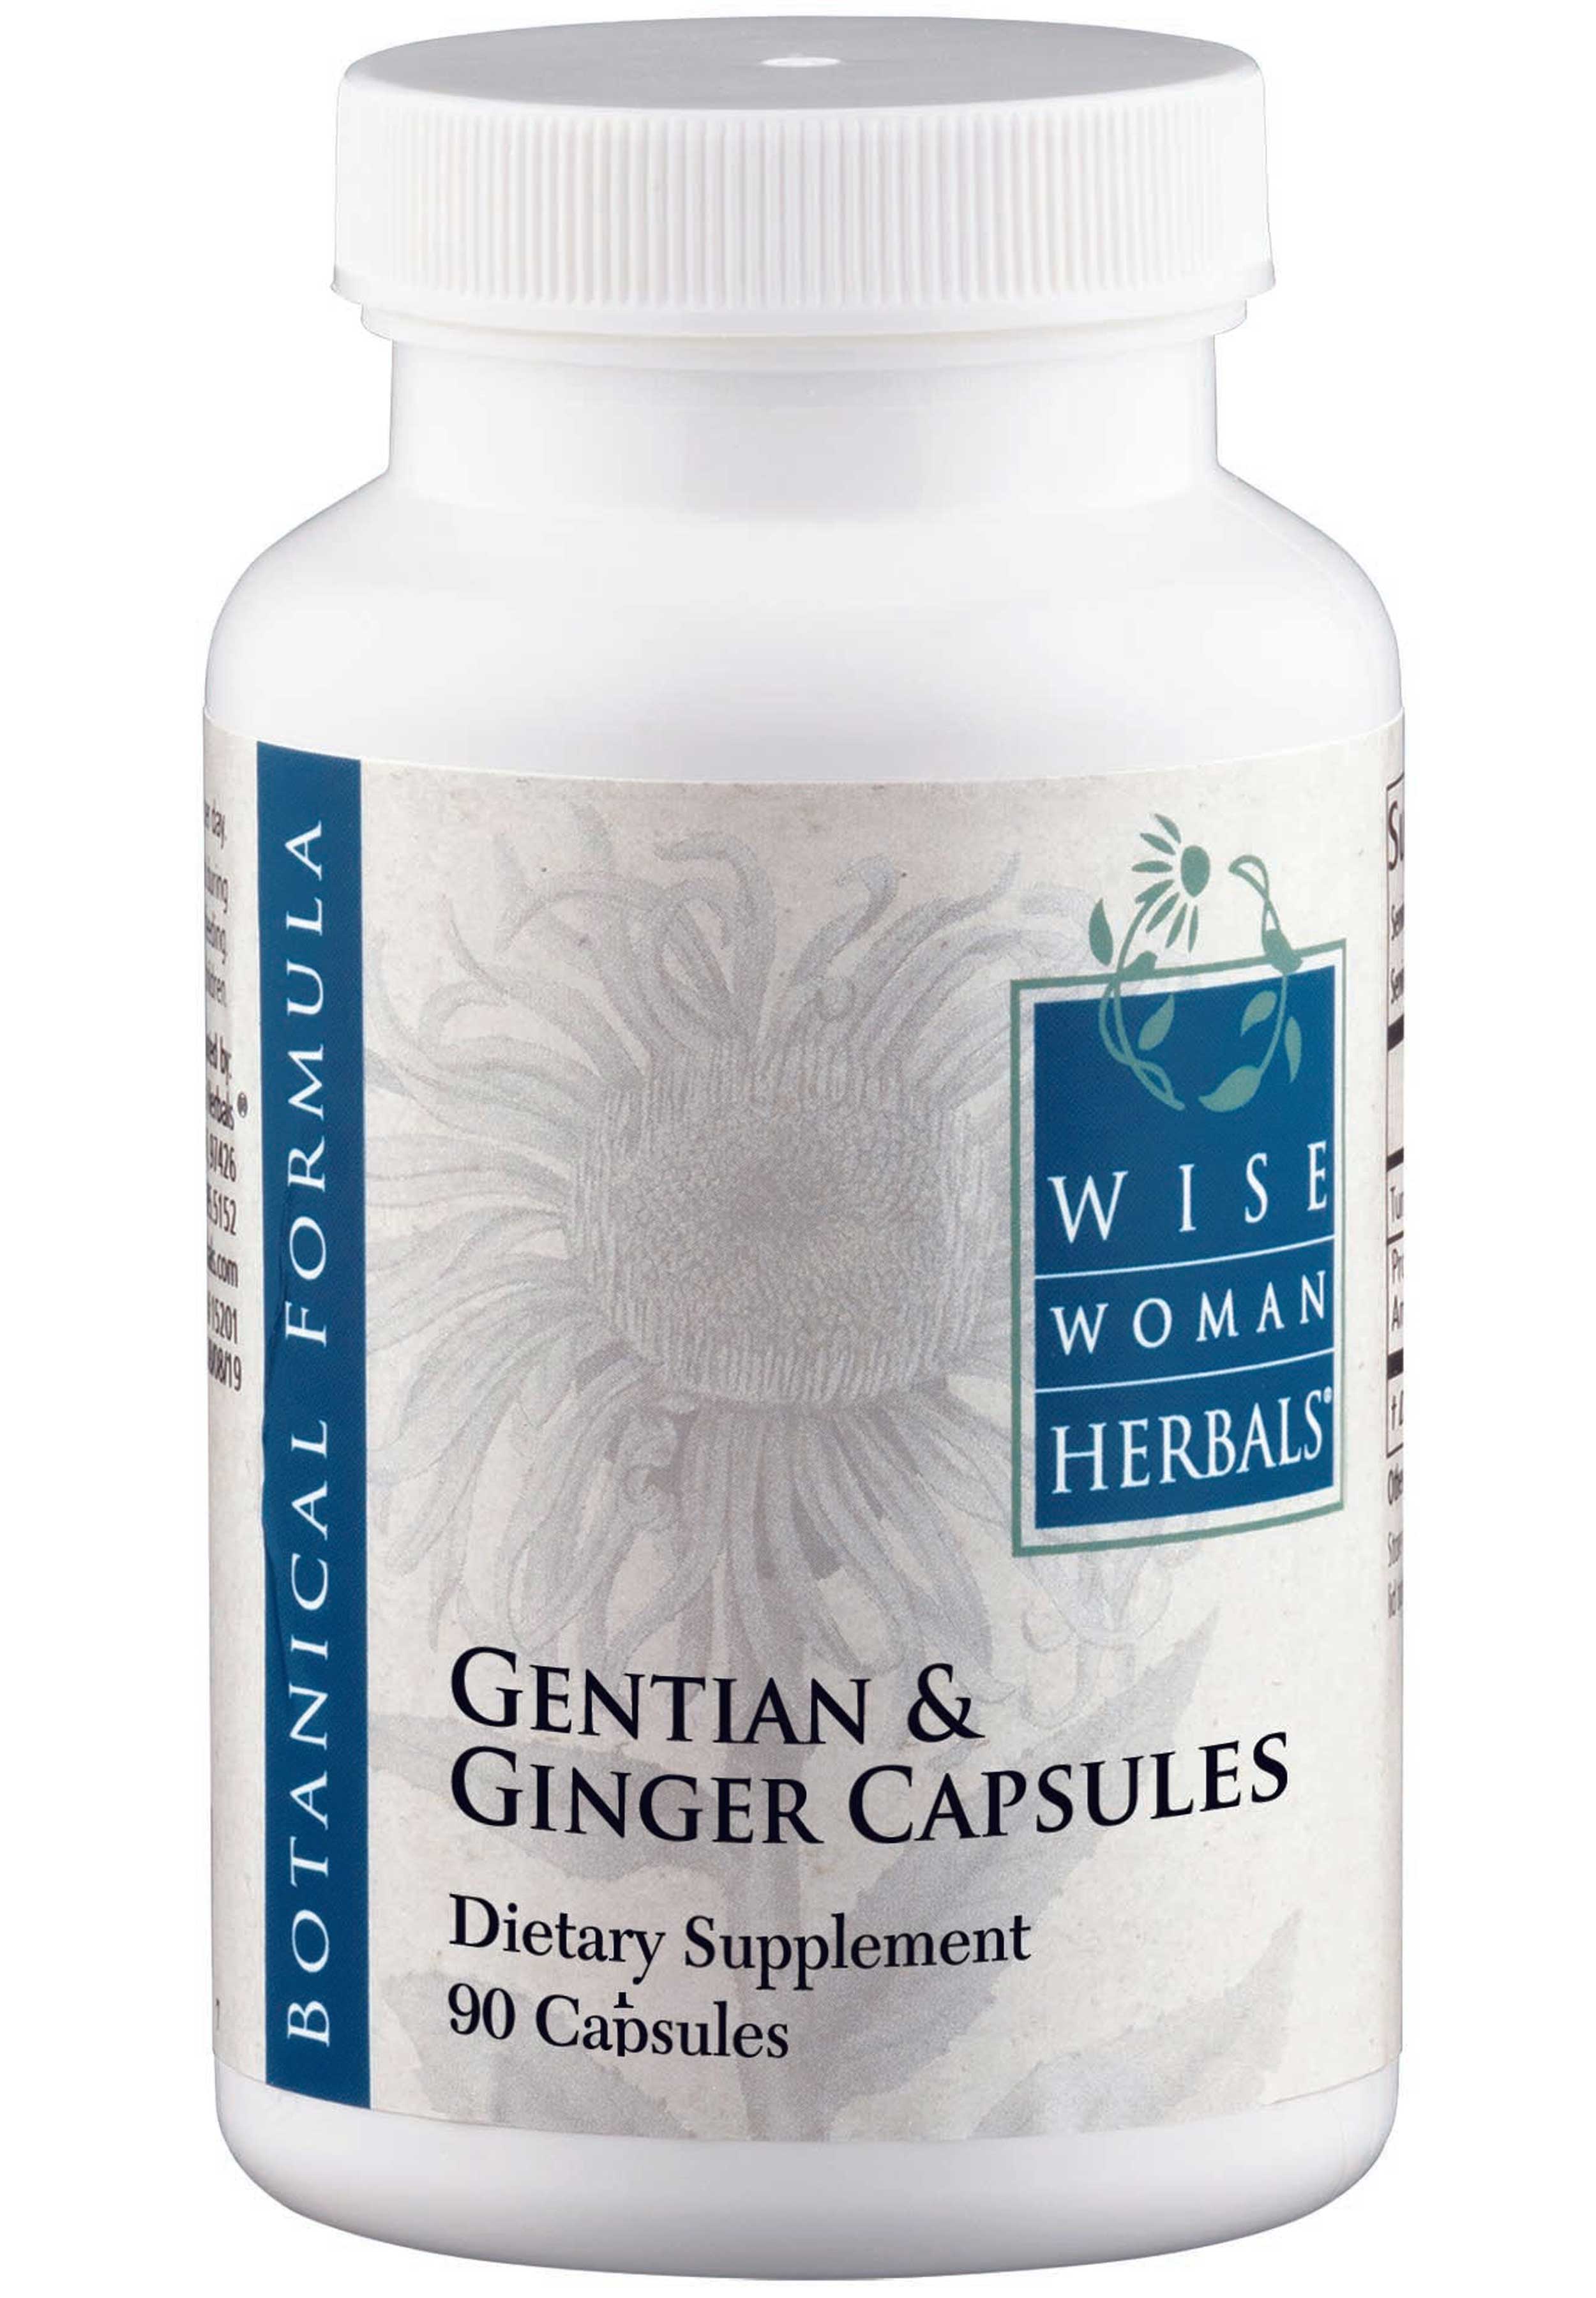 Wise Woman Herbals Gentian And Ginger Capsules